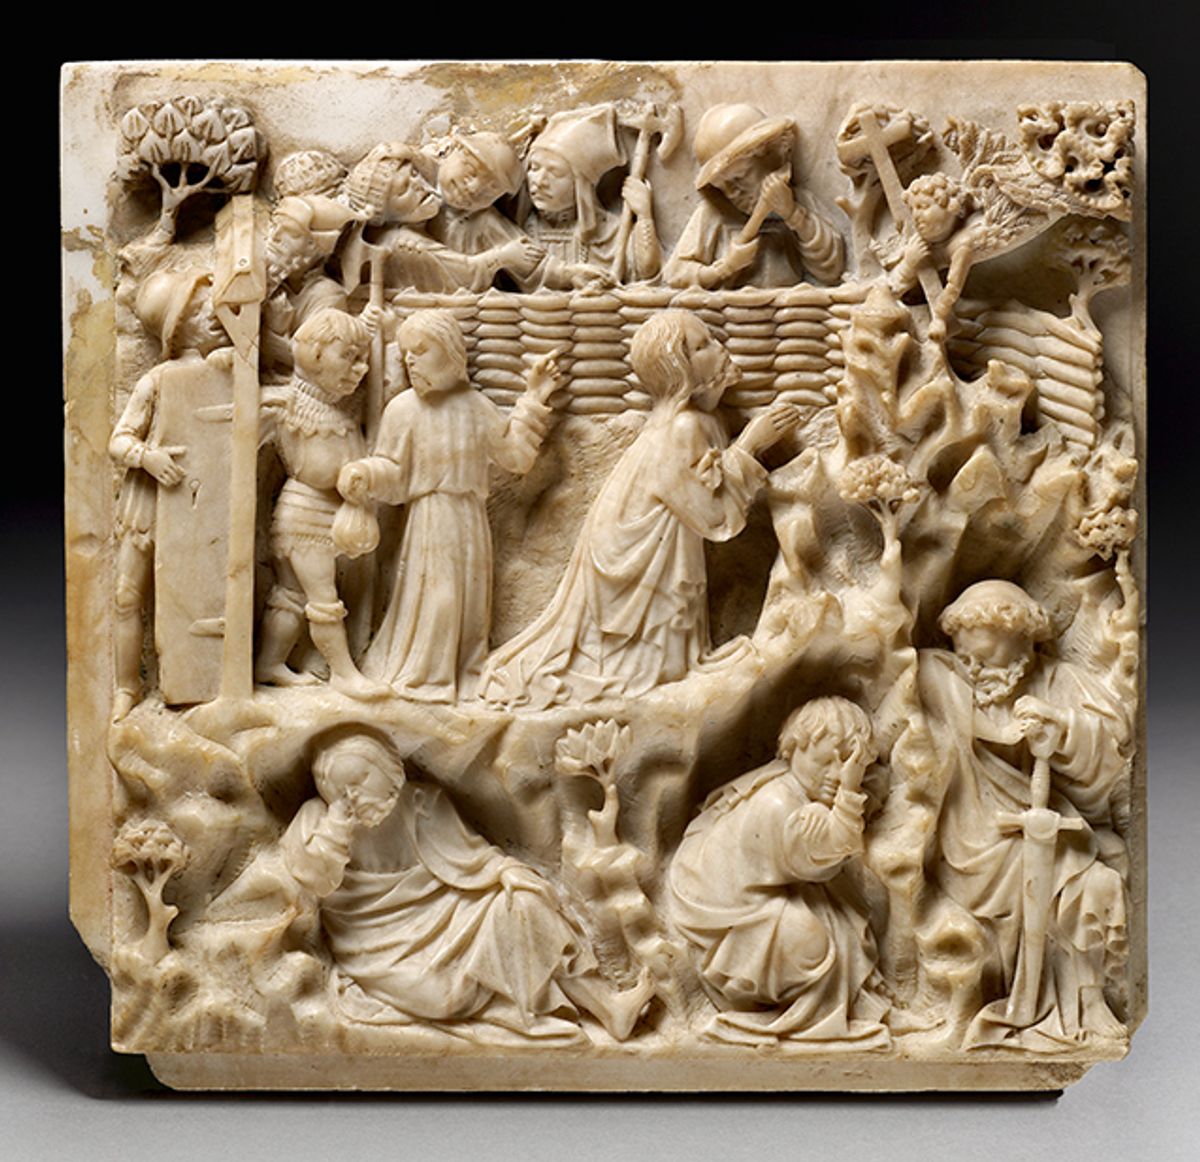 The Agony in the Garden (around 1430-40) by the Rimini Master, one of the pre-eminent continental sculptors of alabaster carving © Antje Voigt/SBM/Ashmolean Museum, University of Oxford